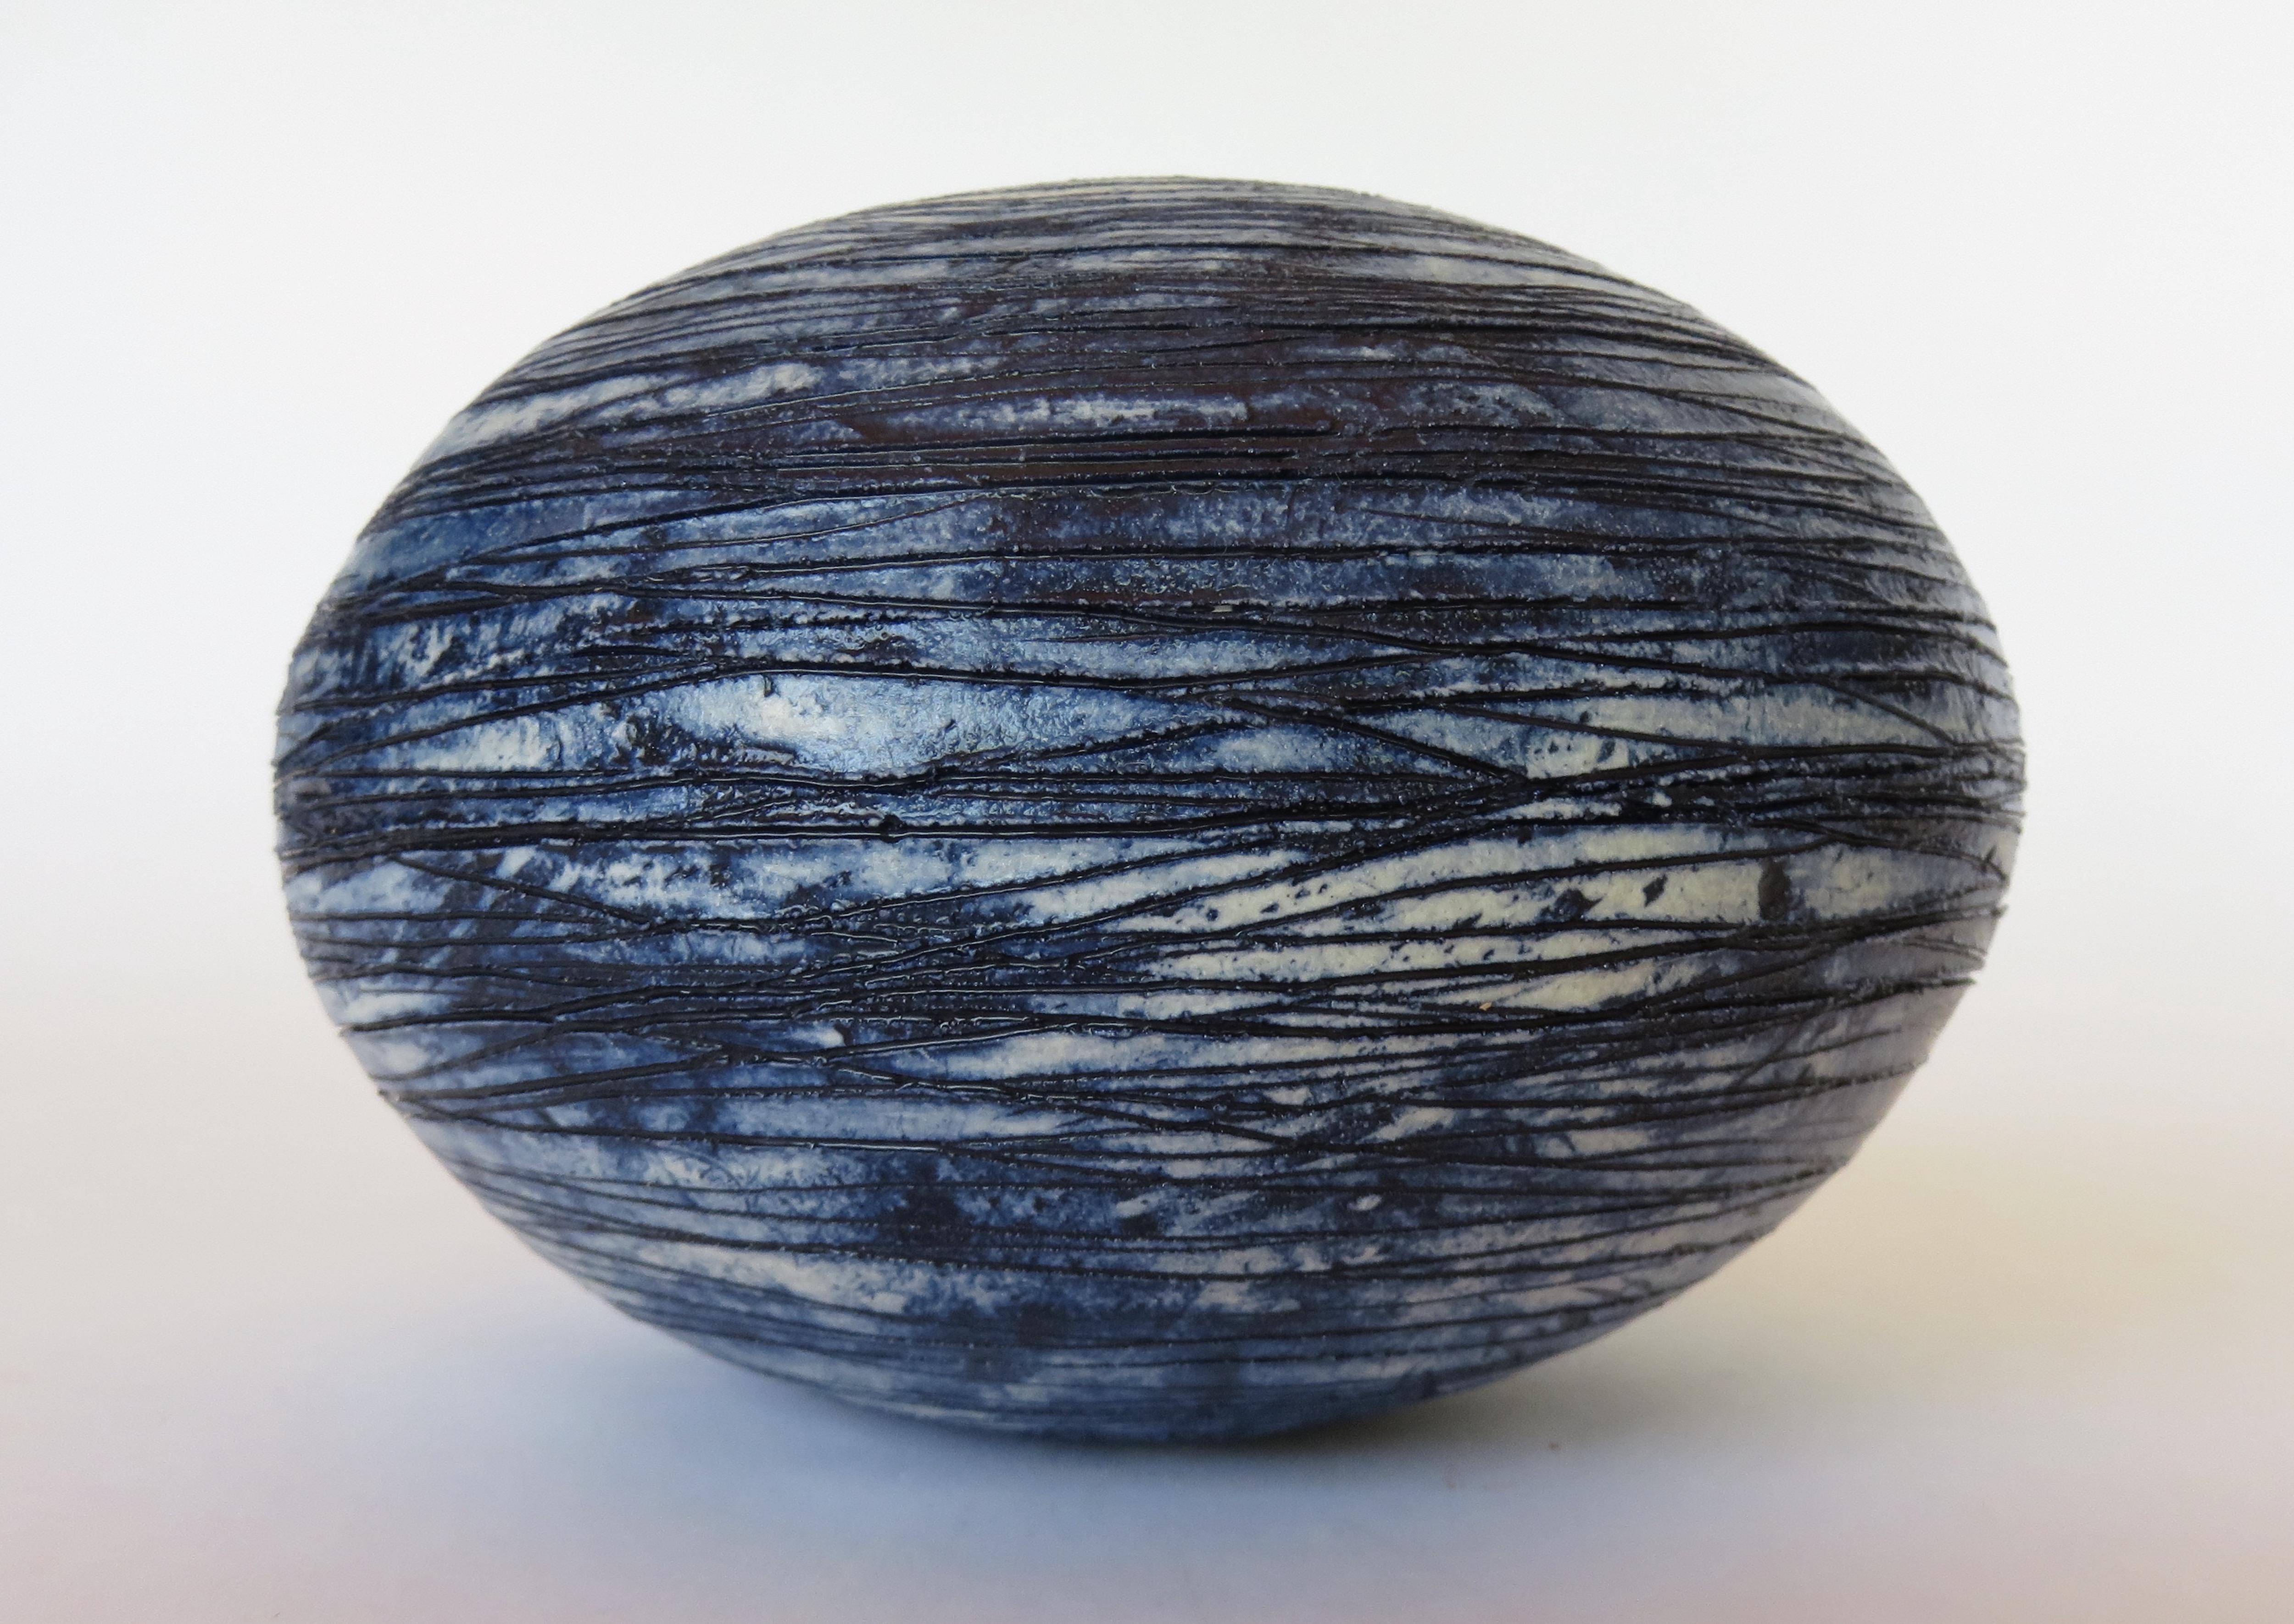 Contemporary Hand Carved Sphere, Ceramic Sculpture in Deep Blue Wash